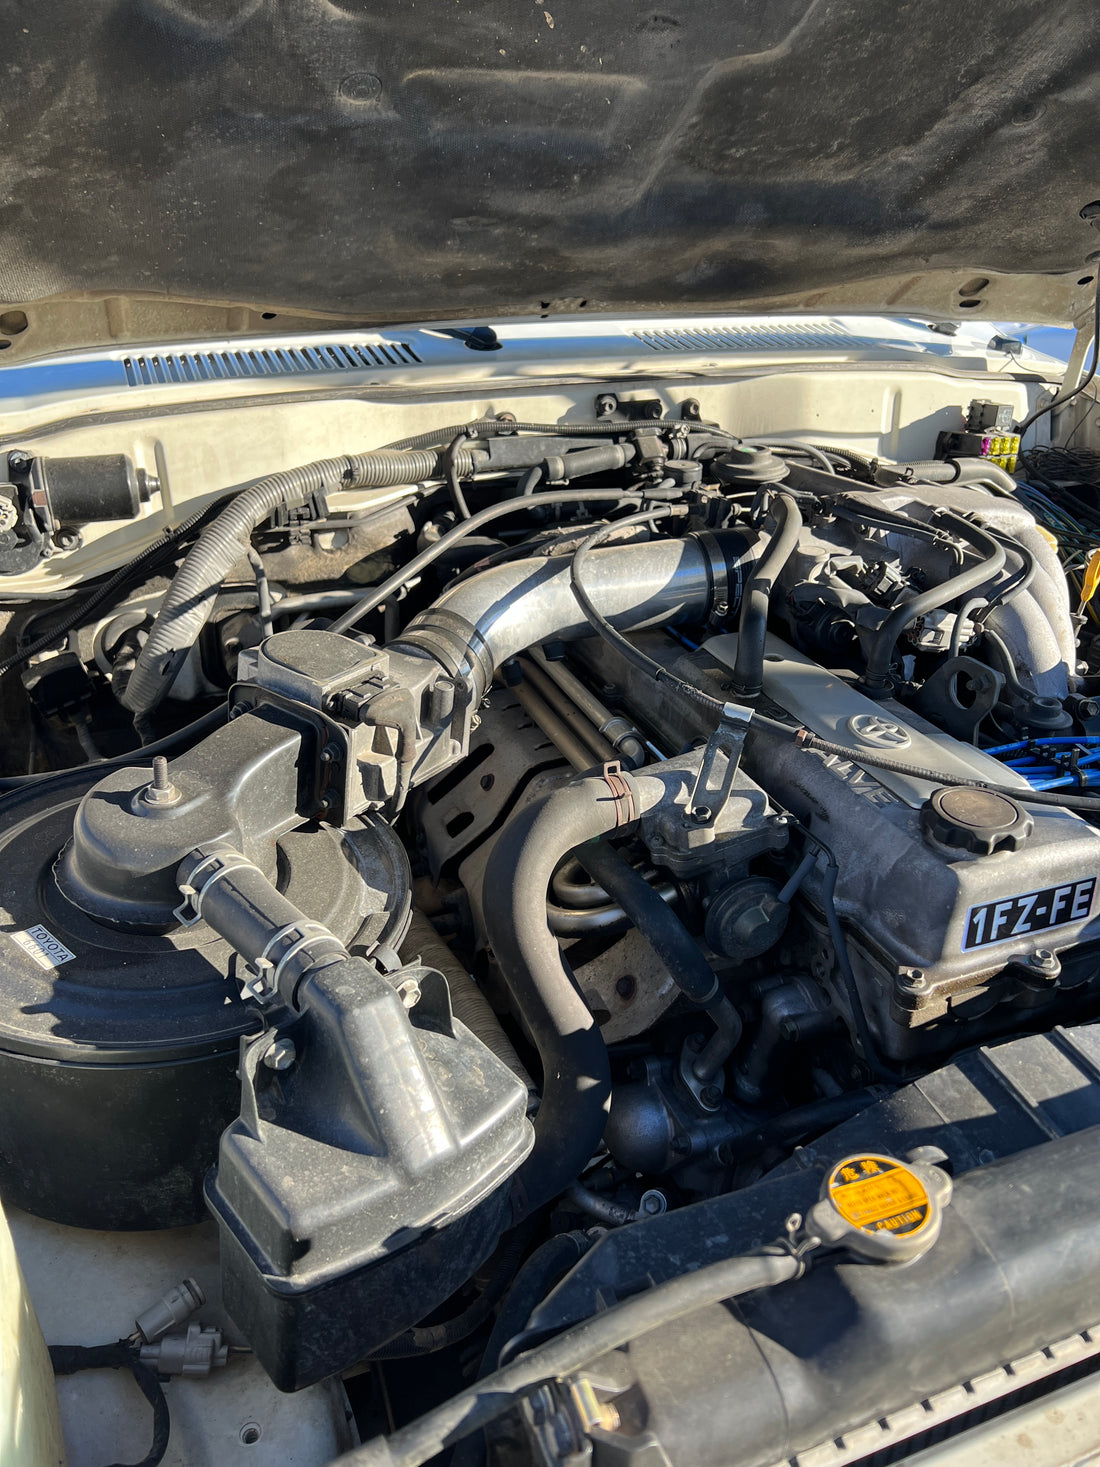 The Reliable and Durable Toyota 1FZ-FE Engine: A Land Cruiser's Best Friend